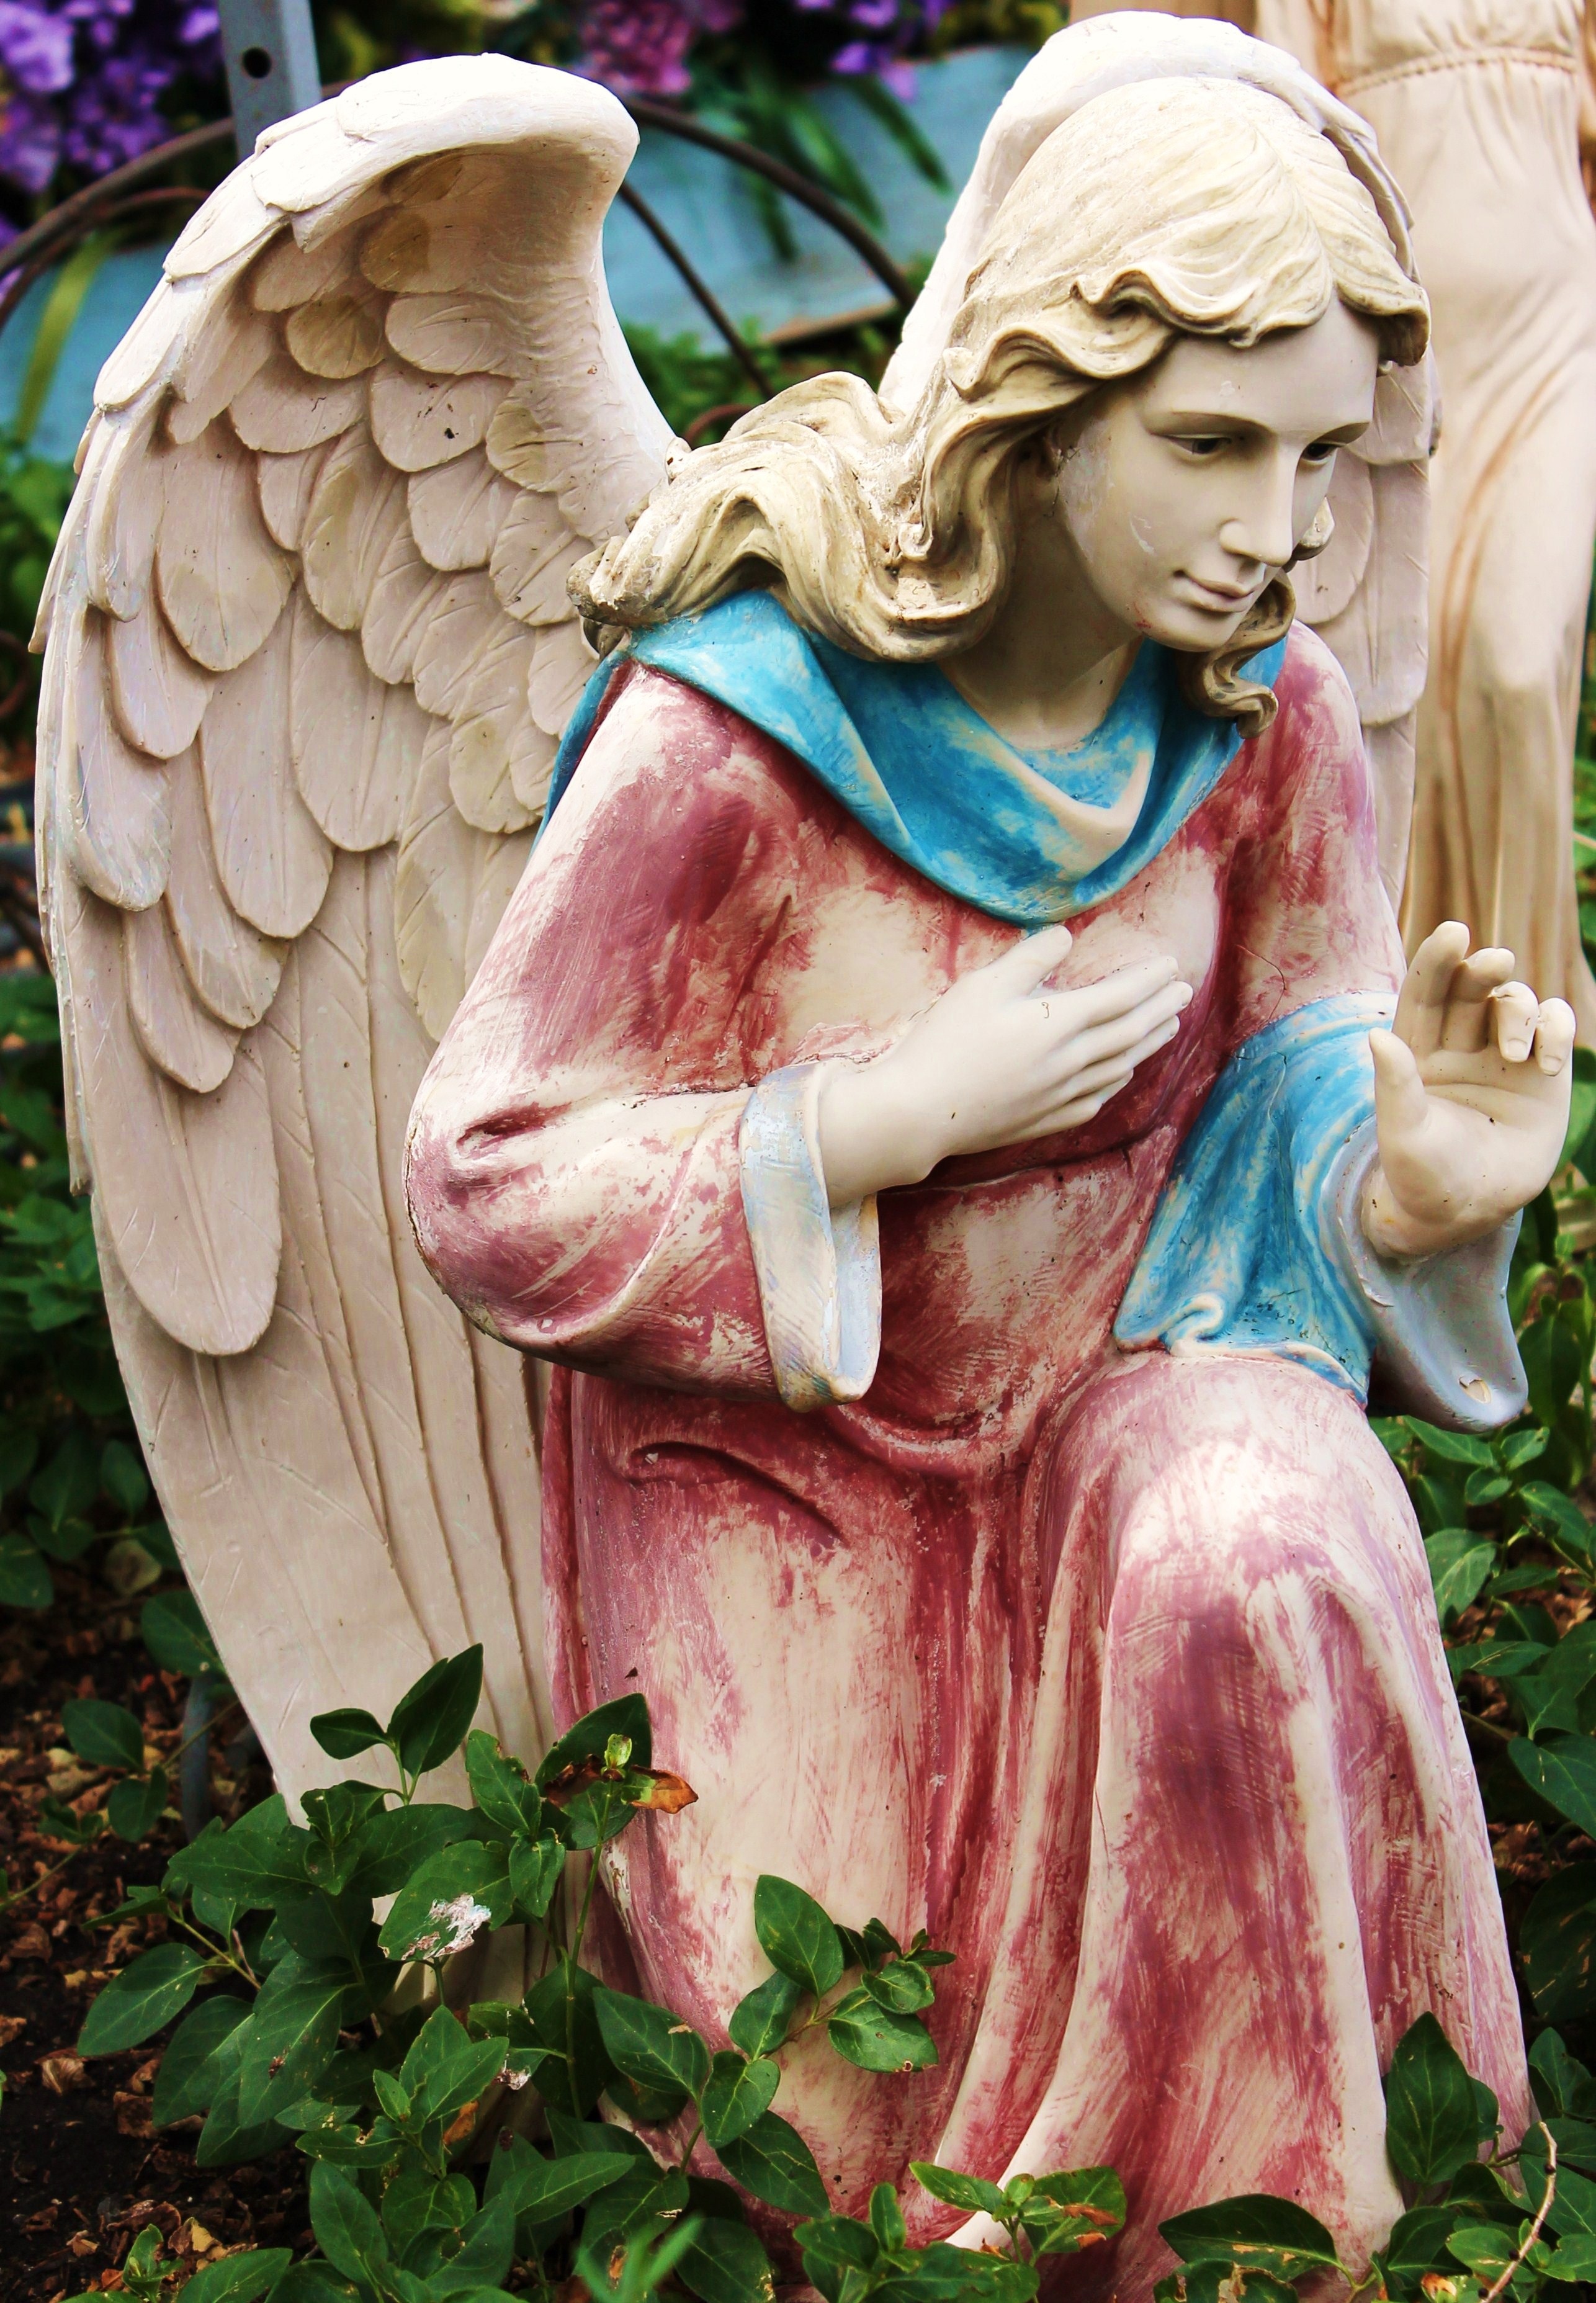 Angel, Statue, Yard Art, Religion, close-up, outdoors